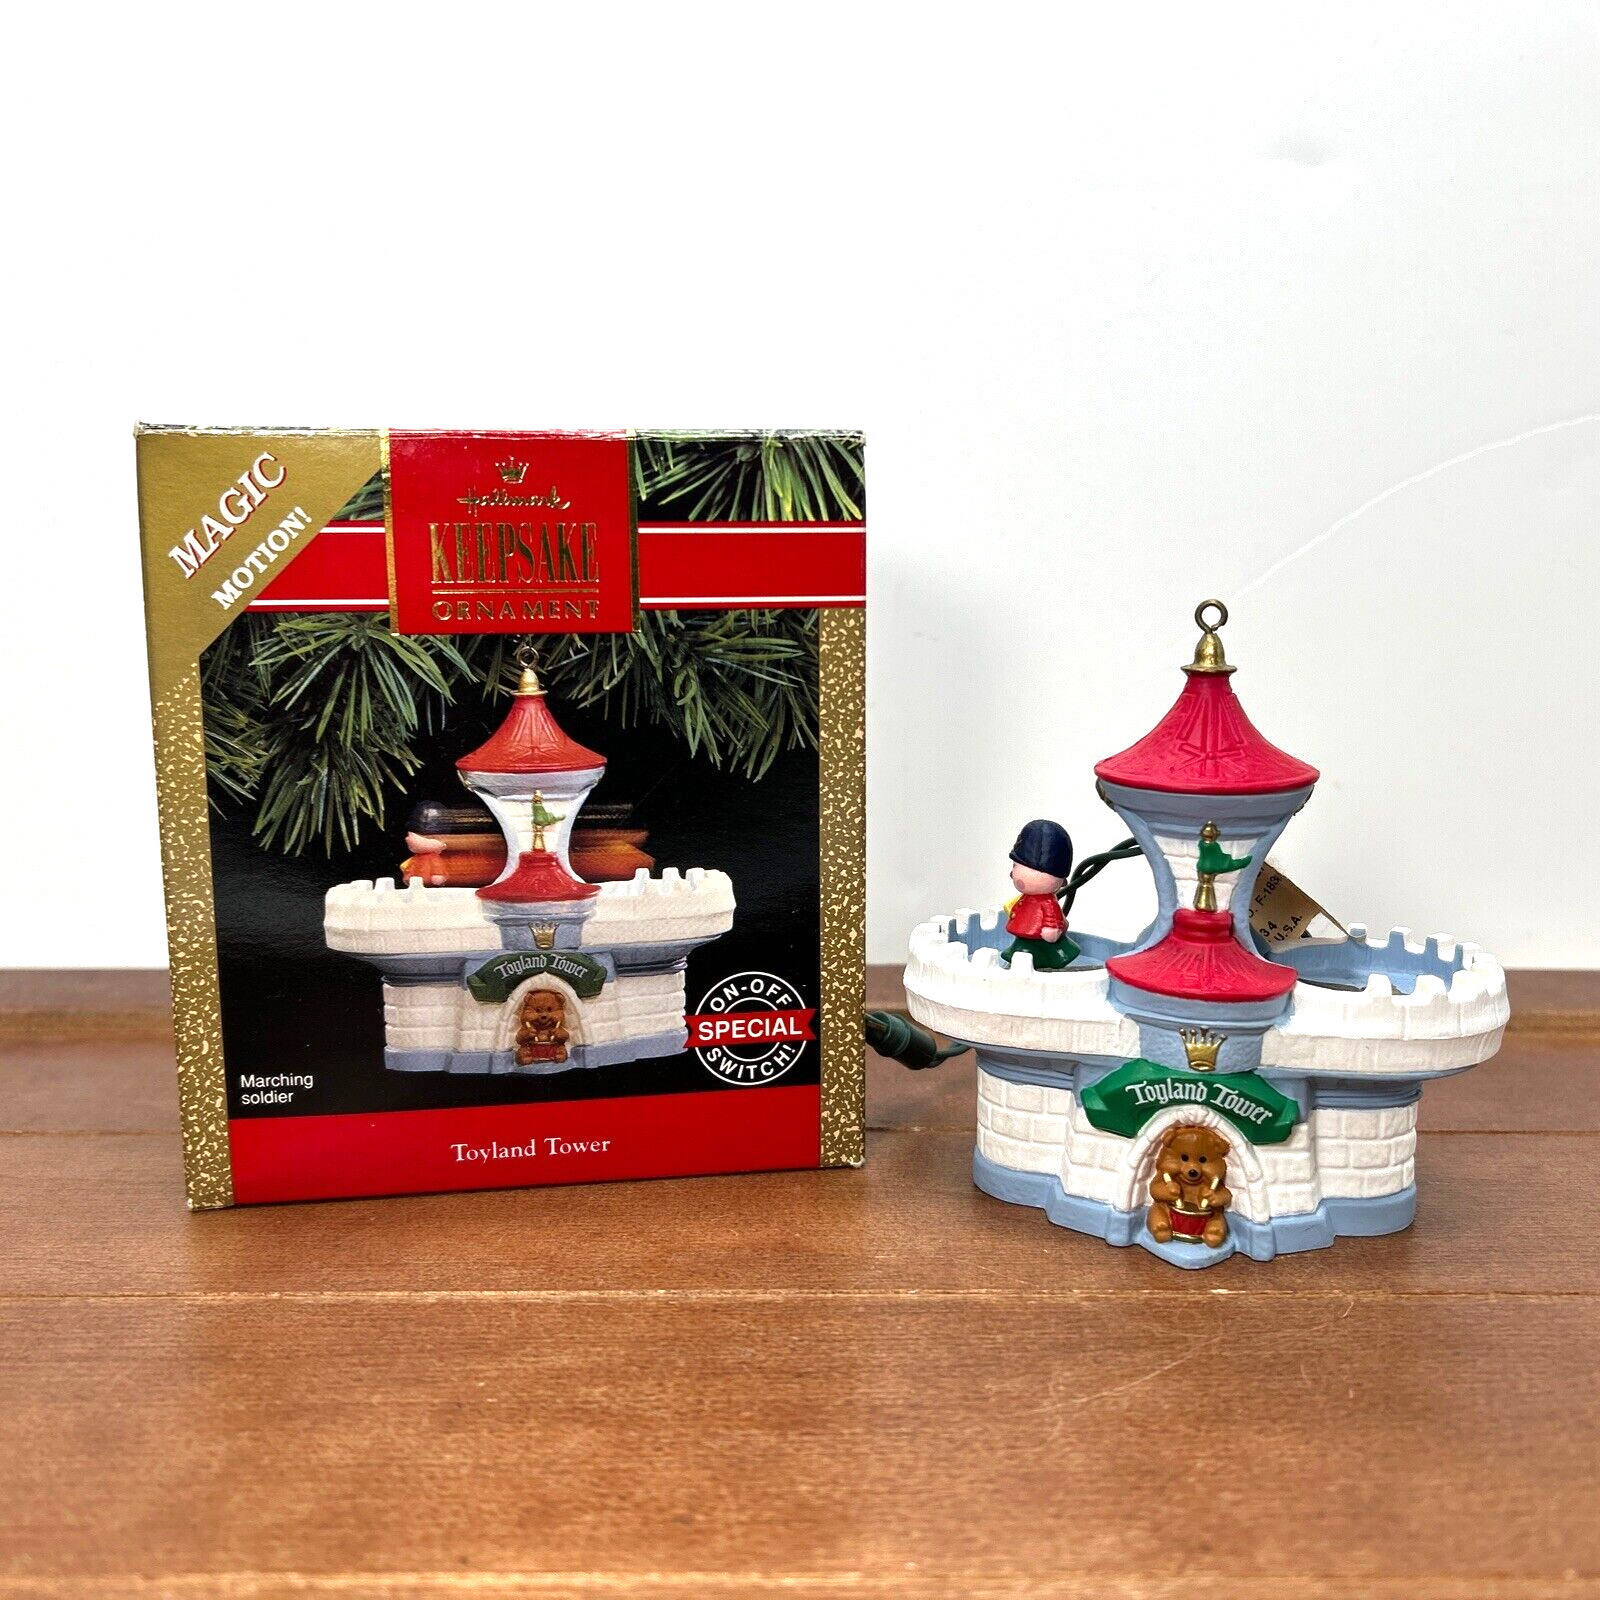 1991 Hallmark Toyland Tower Magic Motion Marching Soldier Christmas Ornament